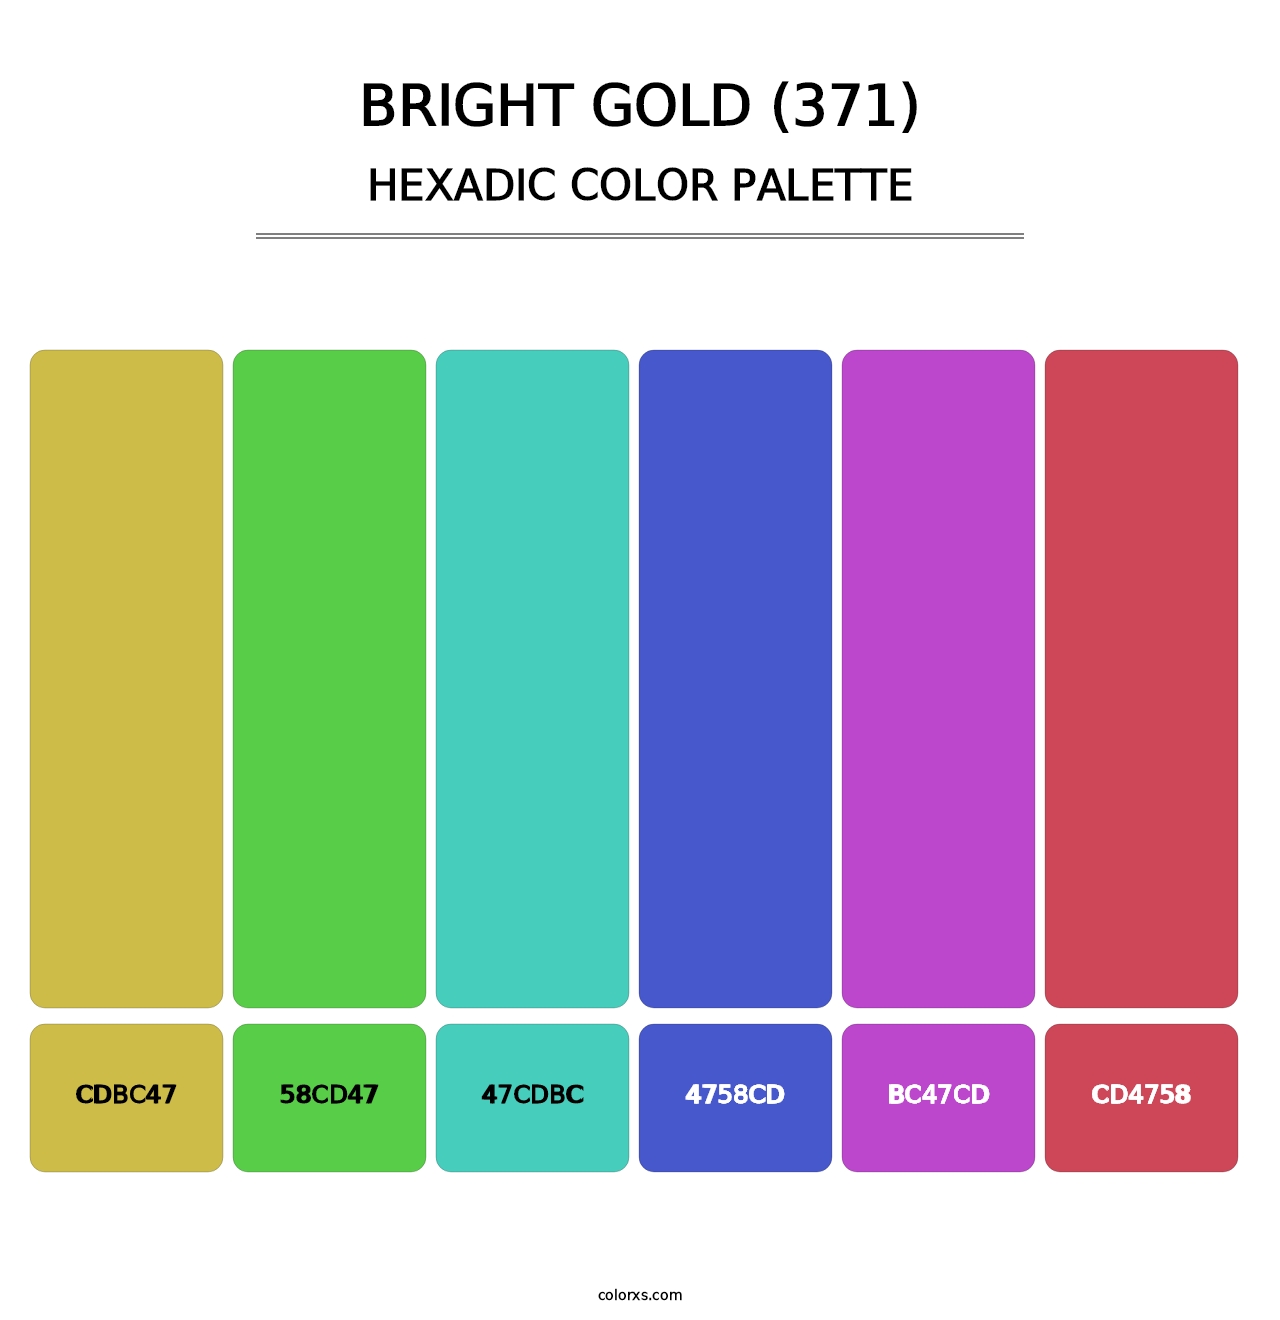 Bright Gold (371) - Hexadic Color Palette